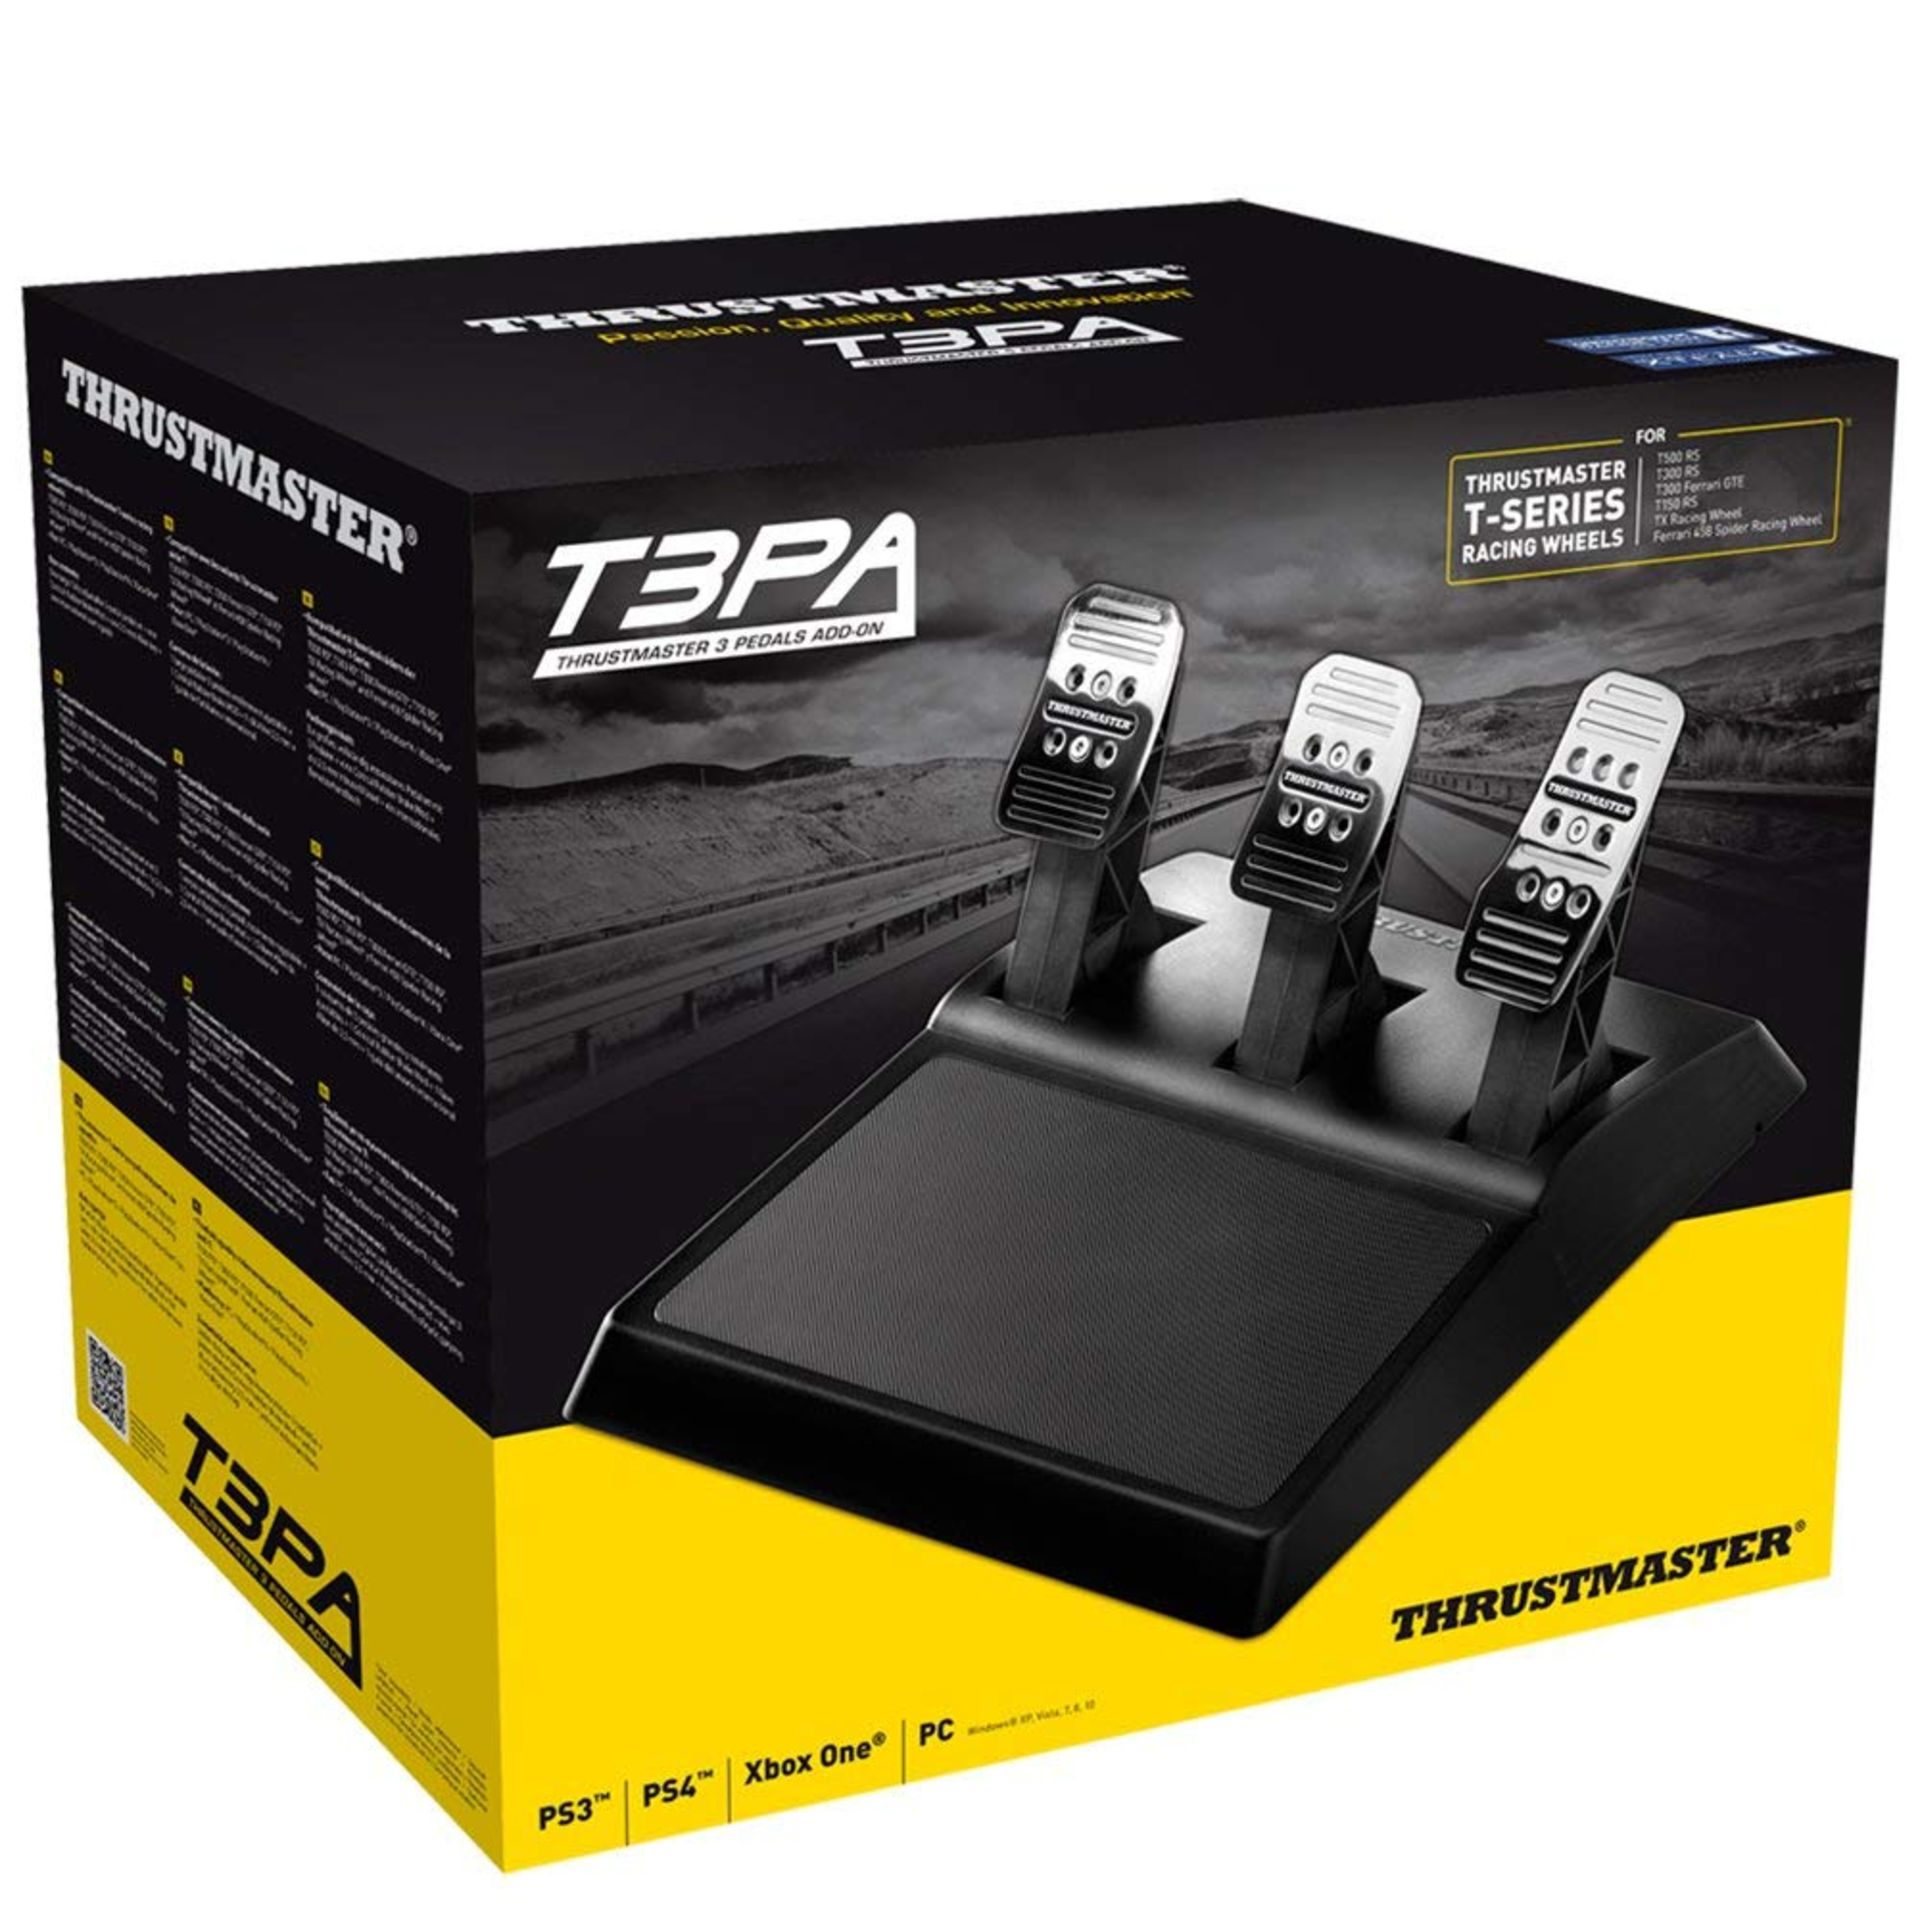 1 x Thrustmaster T3PA Pedal Set | 3362934001179 | RRP £ 99.99 - Image 2 of 2